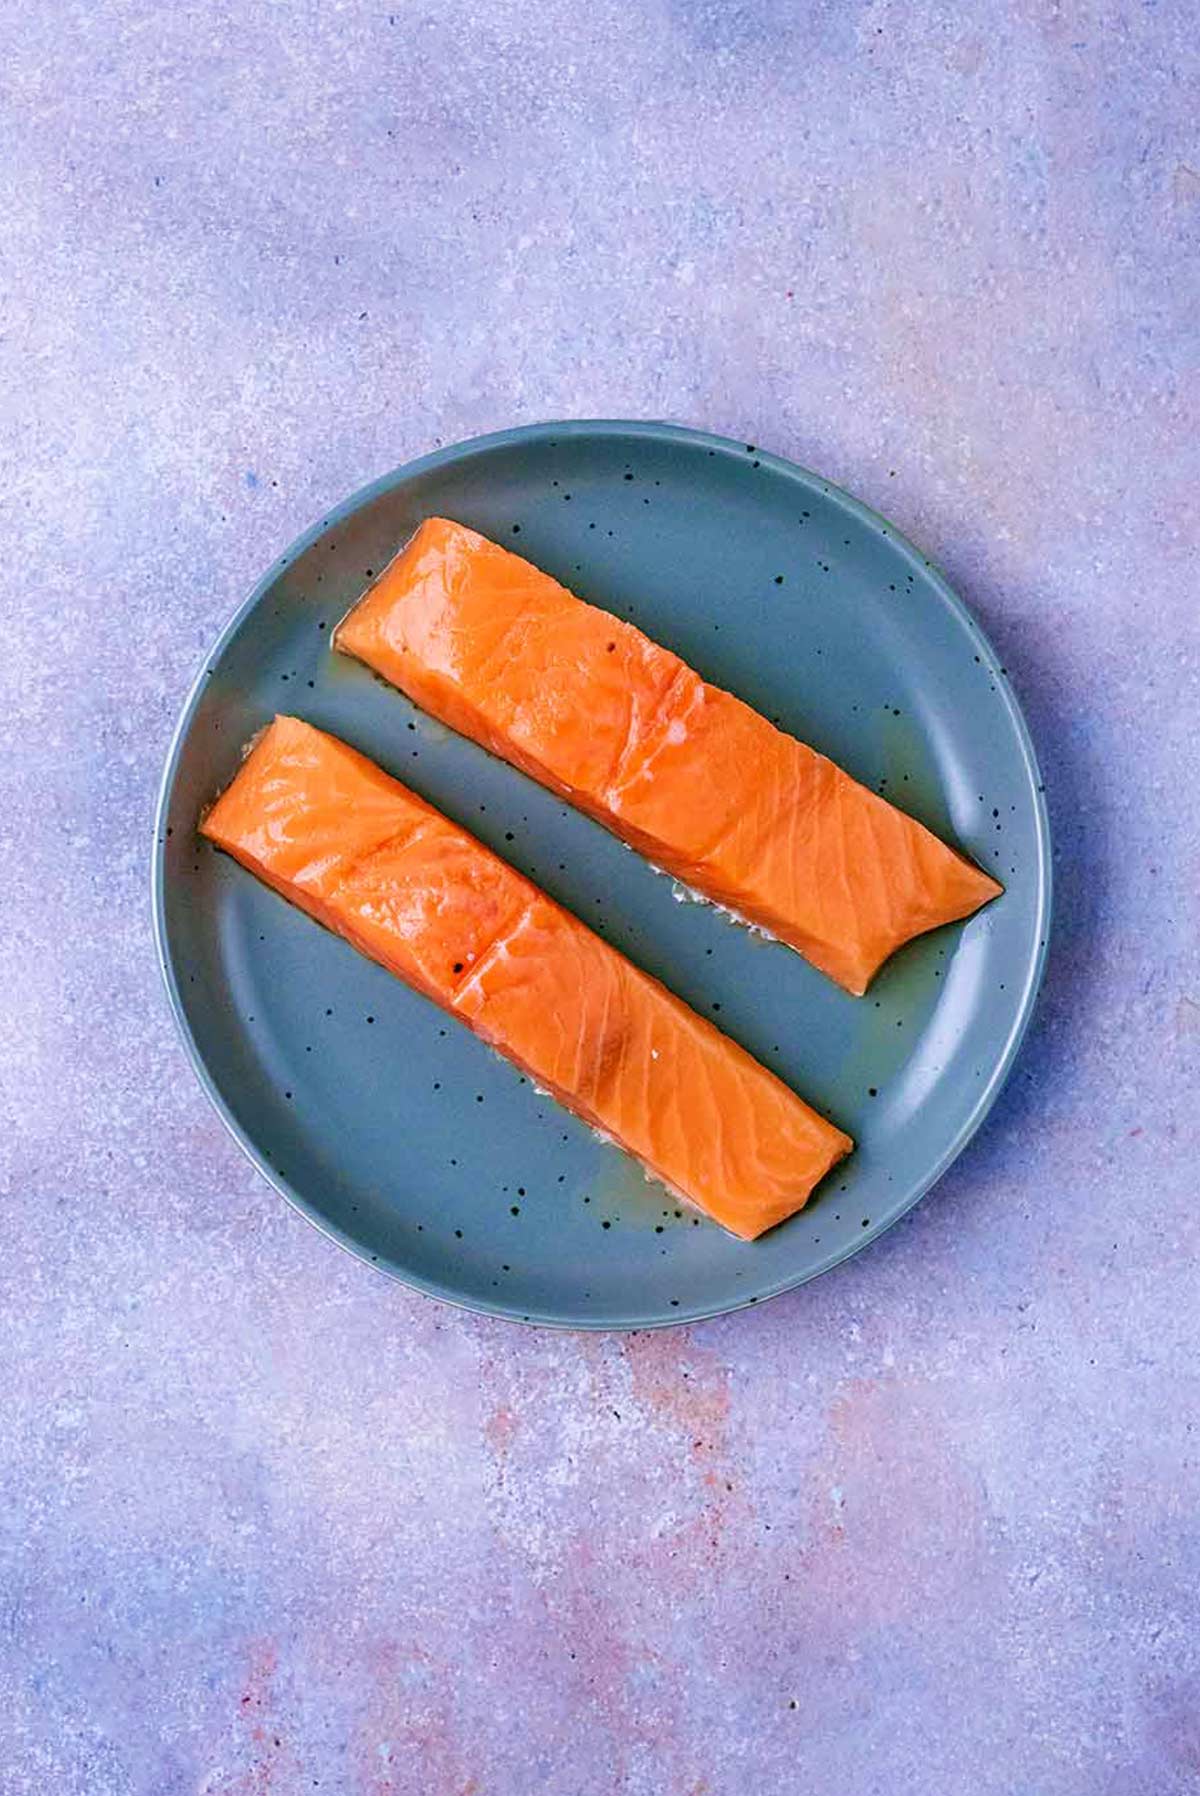 A plate with two salmon fillets on it.